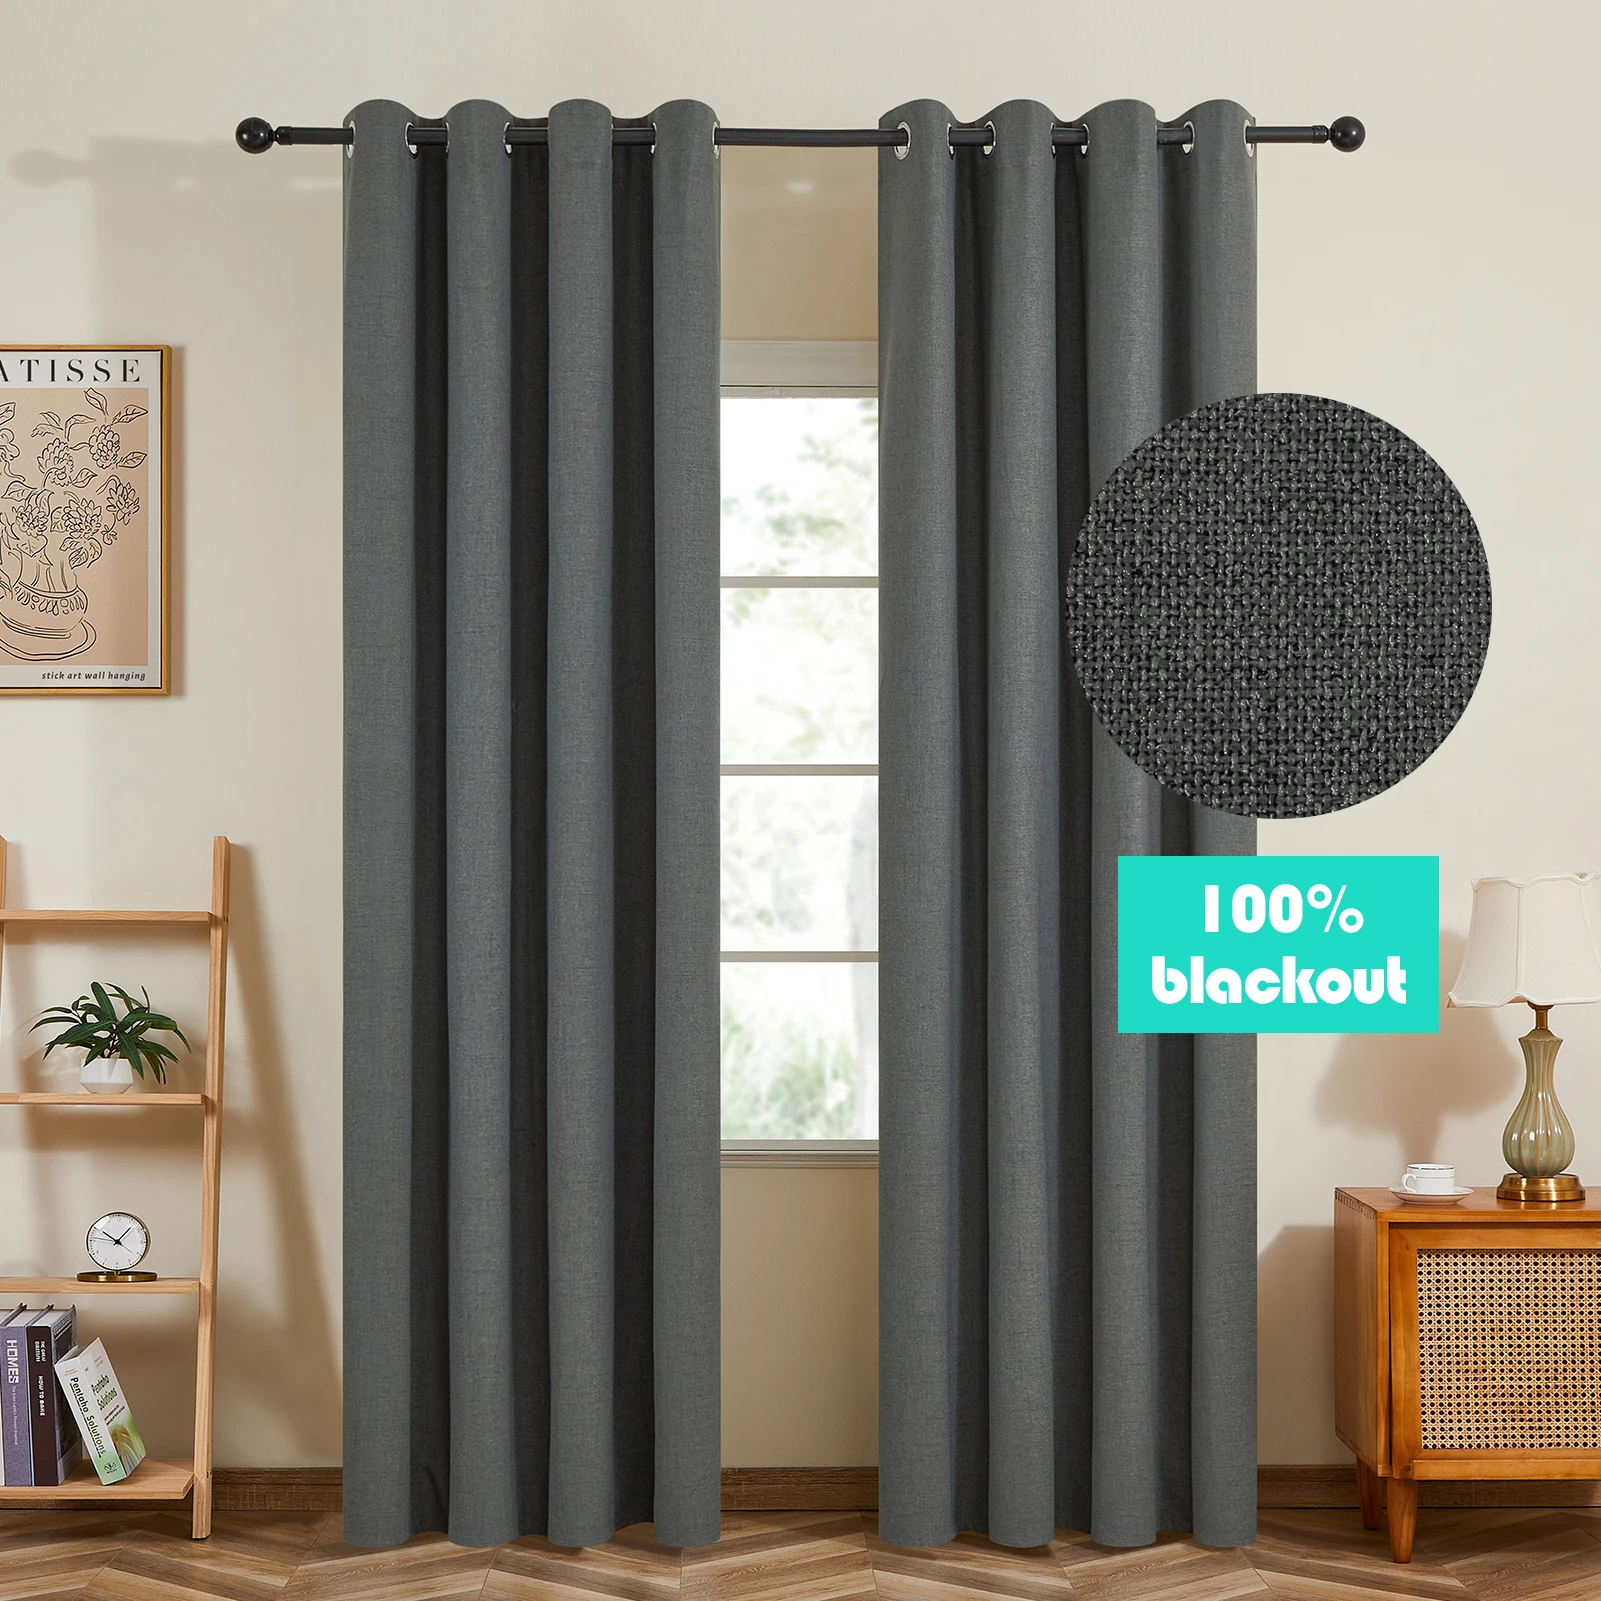 

Grey Thickening Curtain for Bedroom Linen 100% Blackout Curtains for Living Room Window Modern Drapes Cortinas Grommet Custom